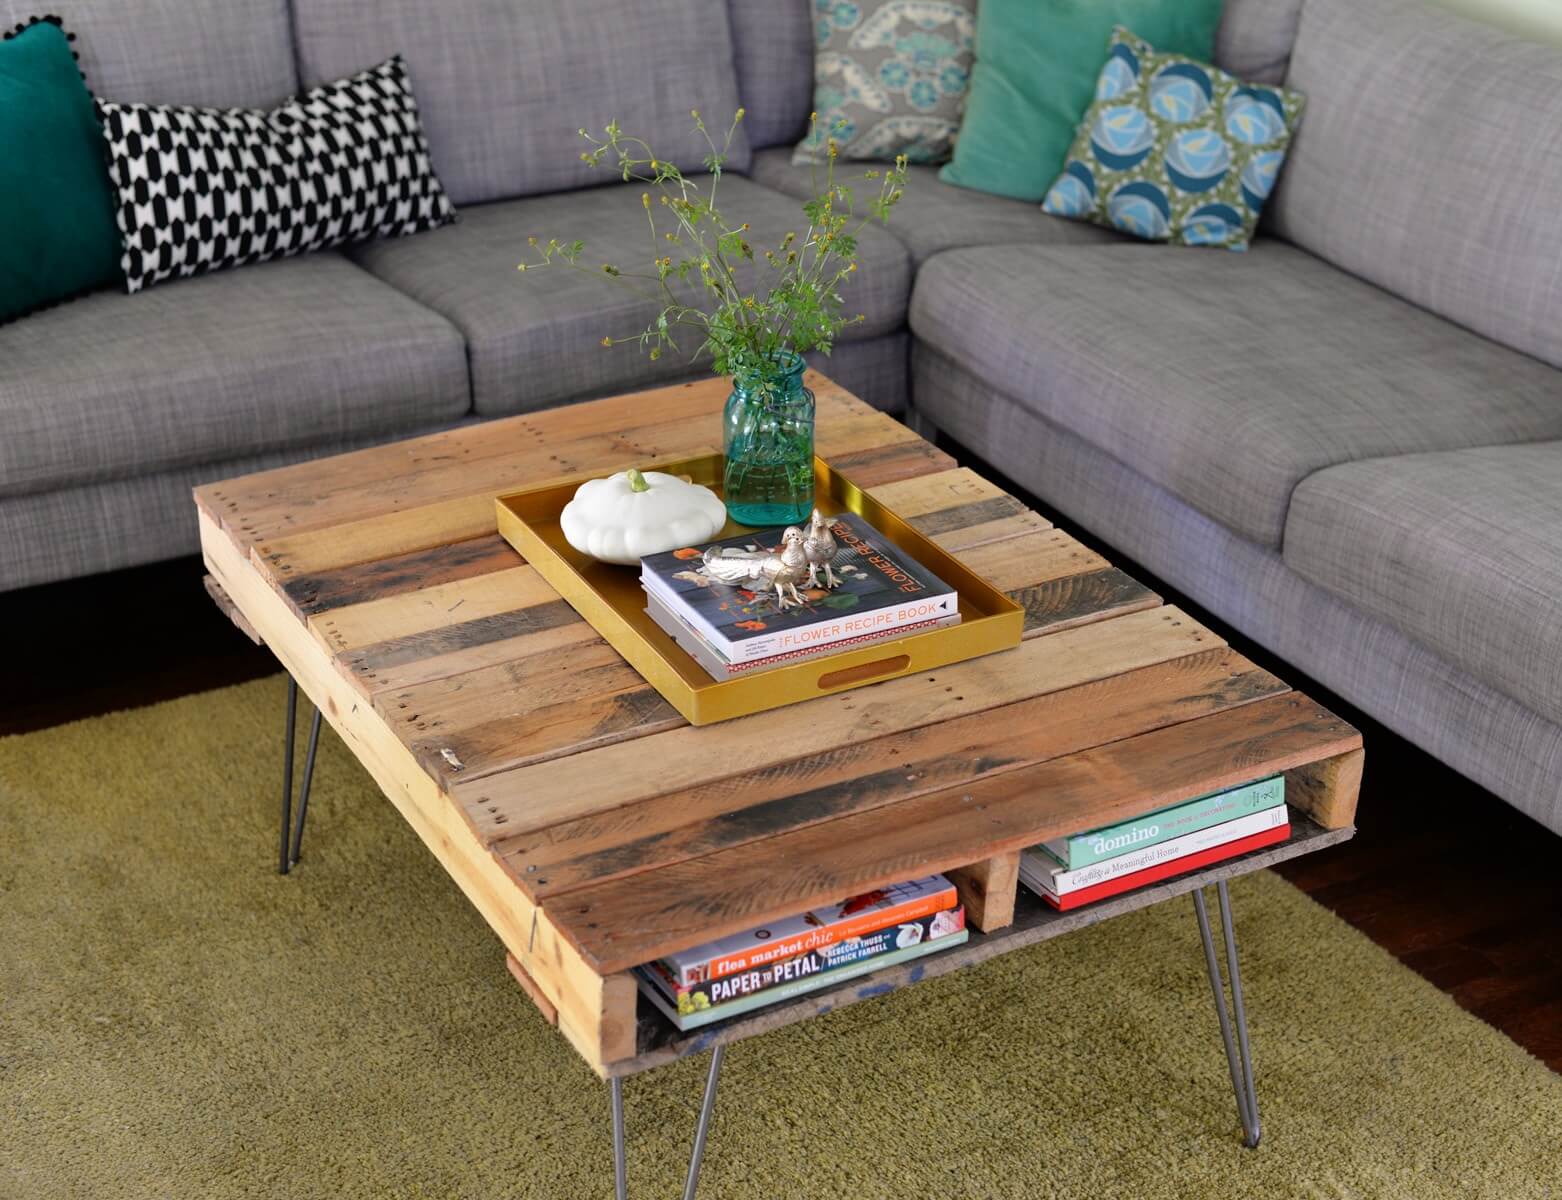 The DIY Pallet Reading Table